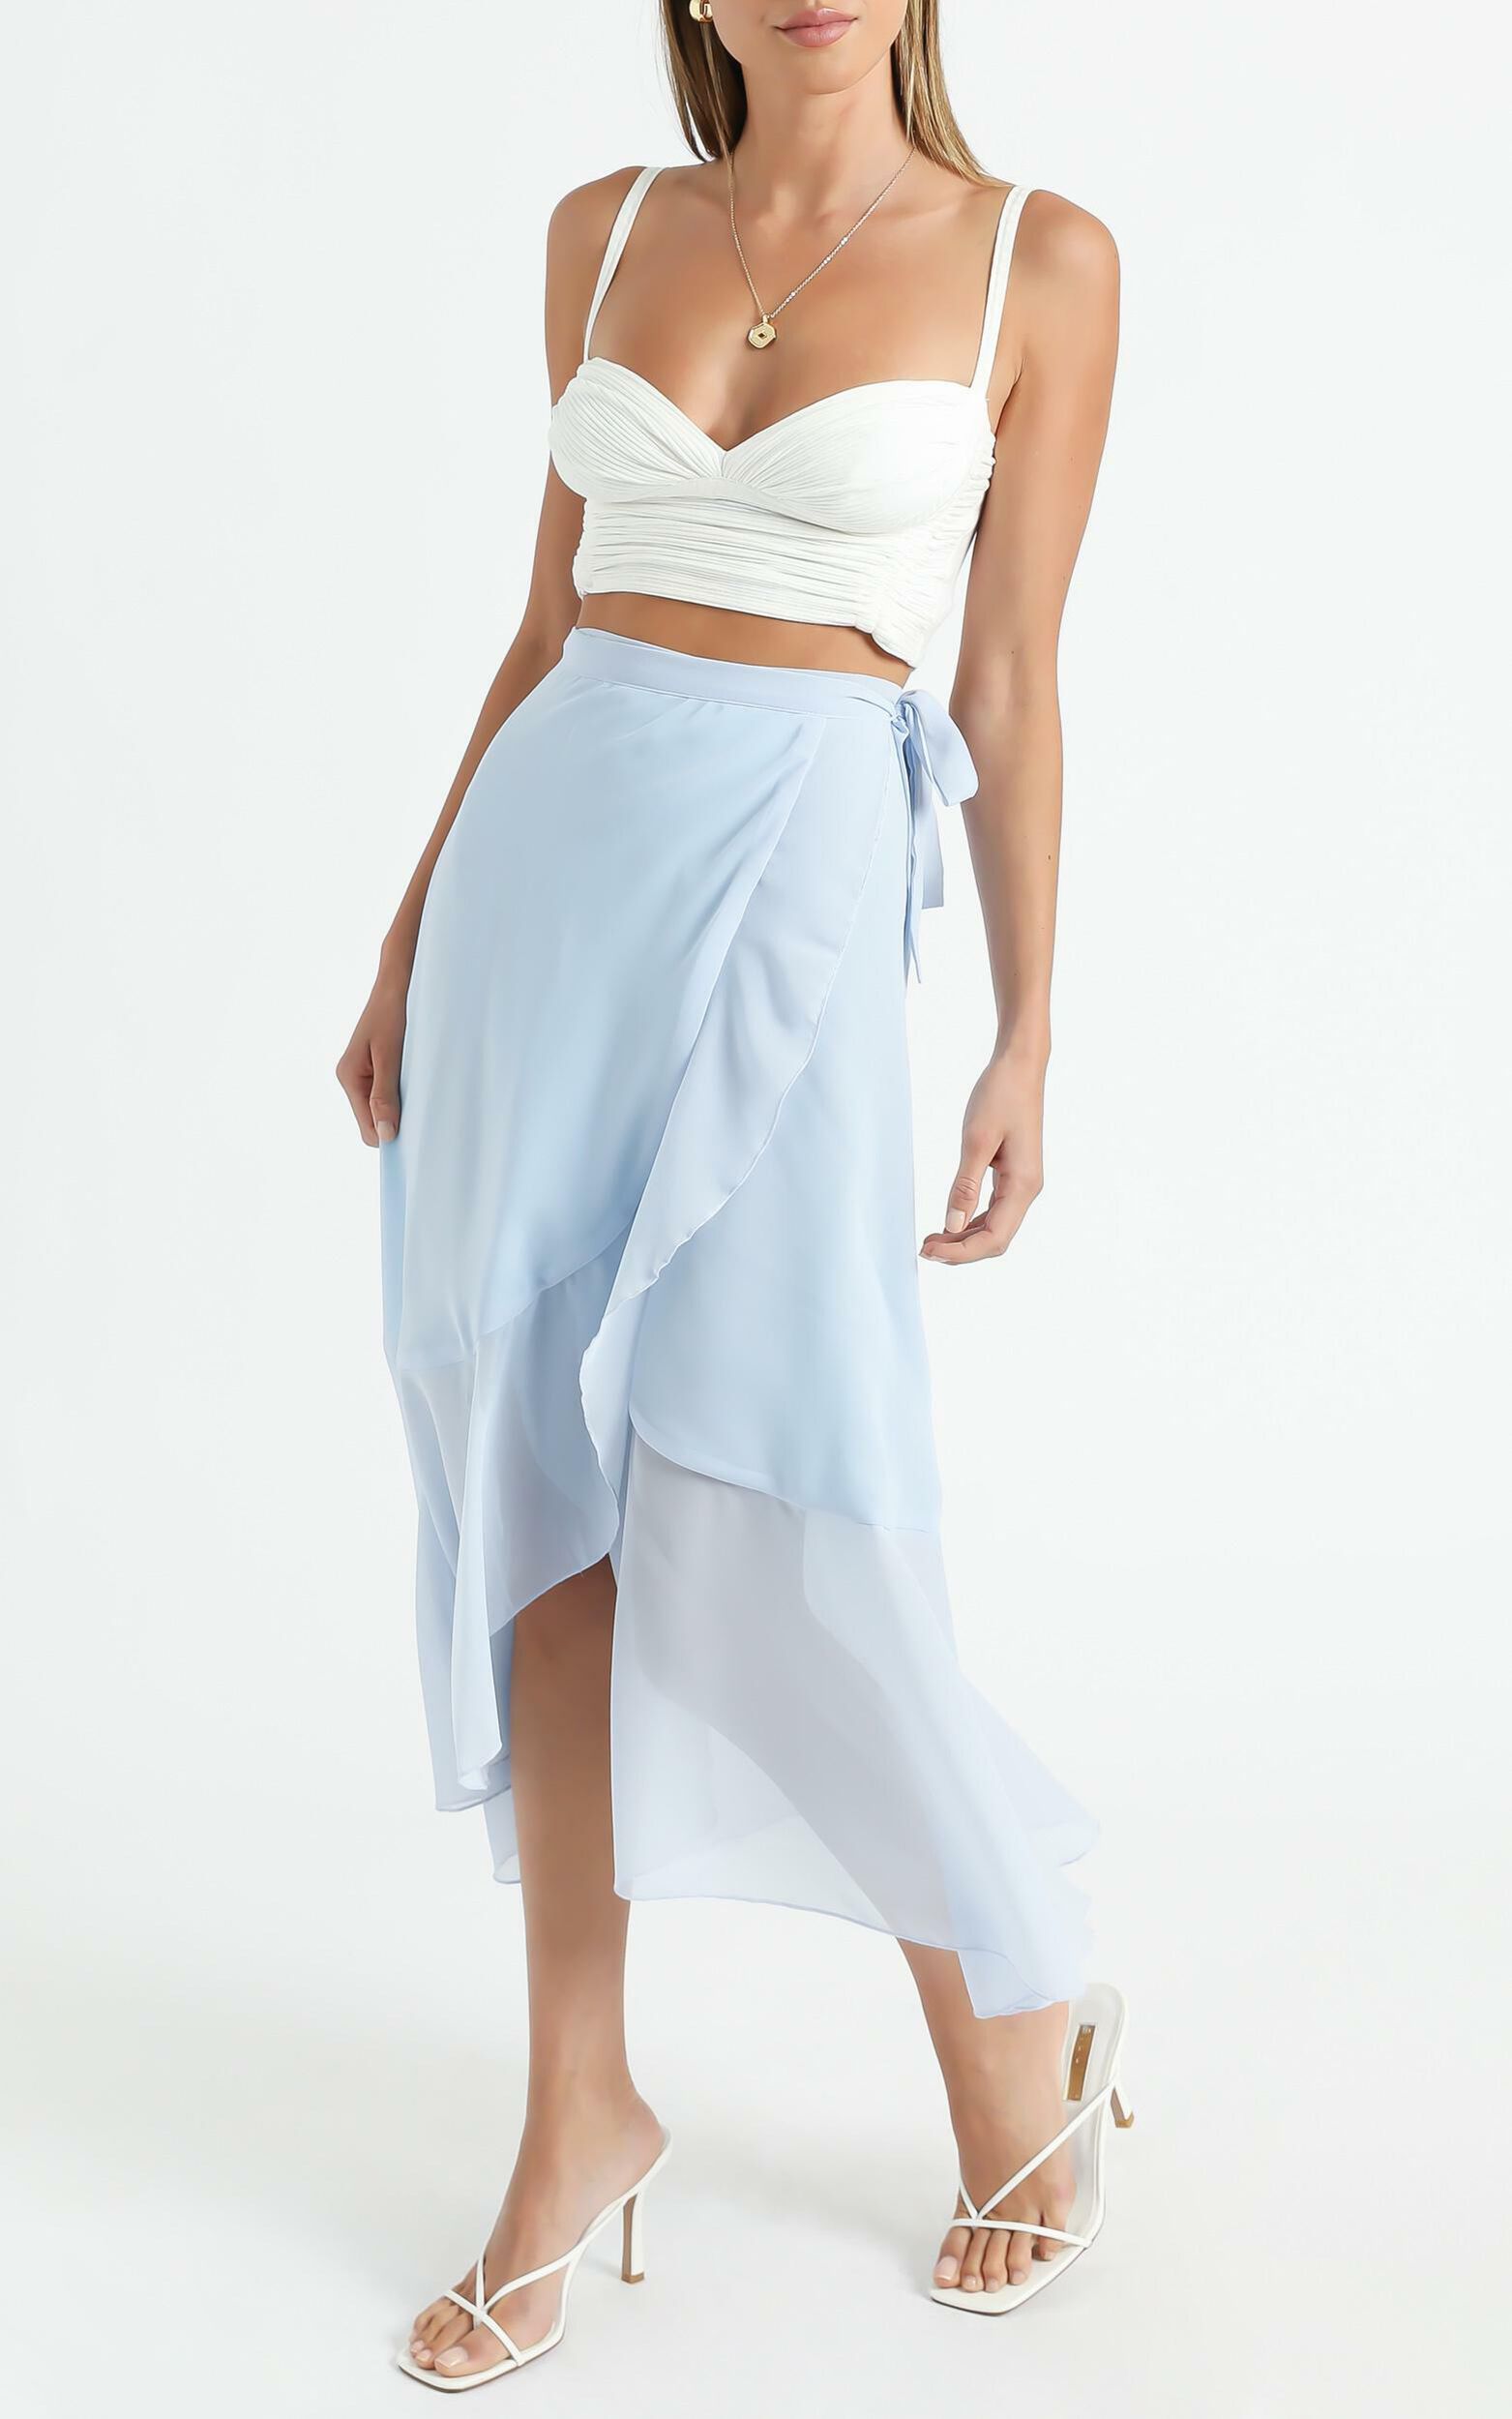 Add To The Mix Skirt in Blue - 06, BLU1